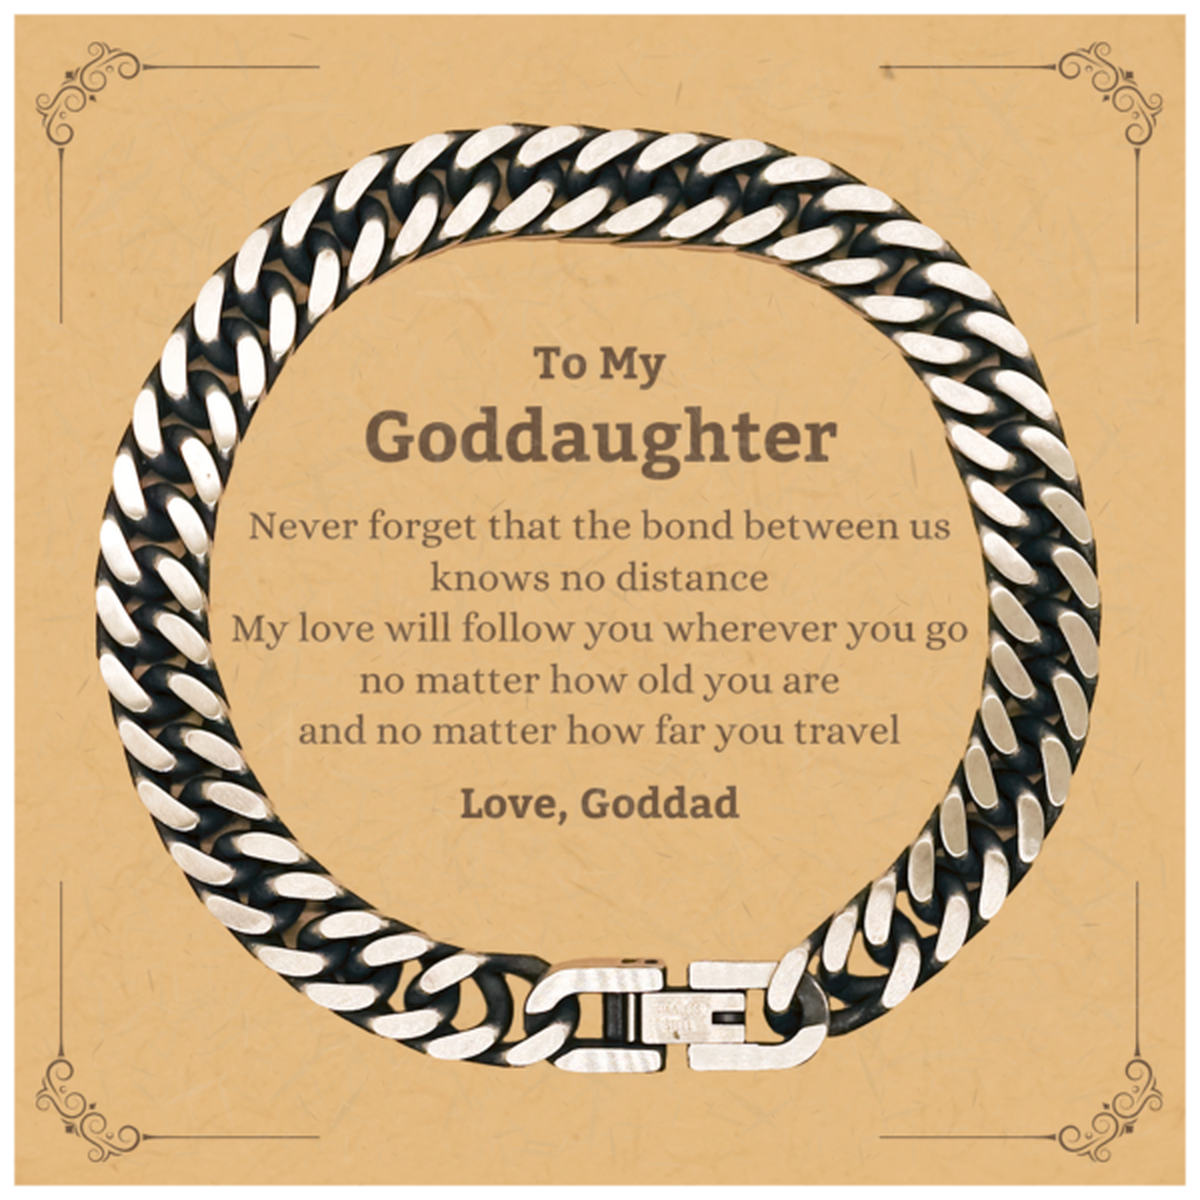 Goddaughter Birthday Gifts from Goddad, Adjustable Cuban Link Chain Bracelet for Goddaughter Christmas Graduation Unique Gifts Goddaughter Never forget that the bond between us knows no distance. Love, Goddad